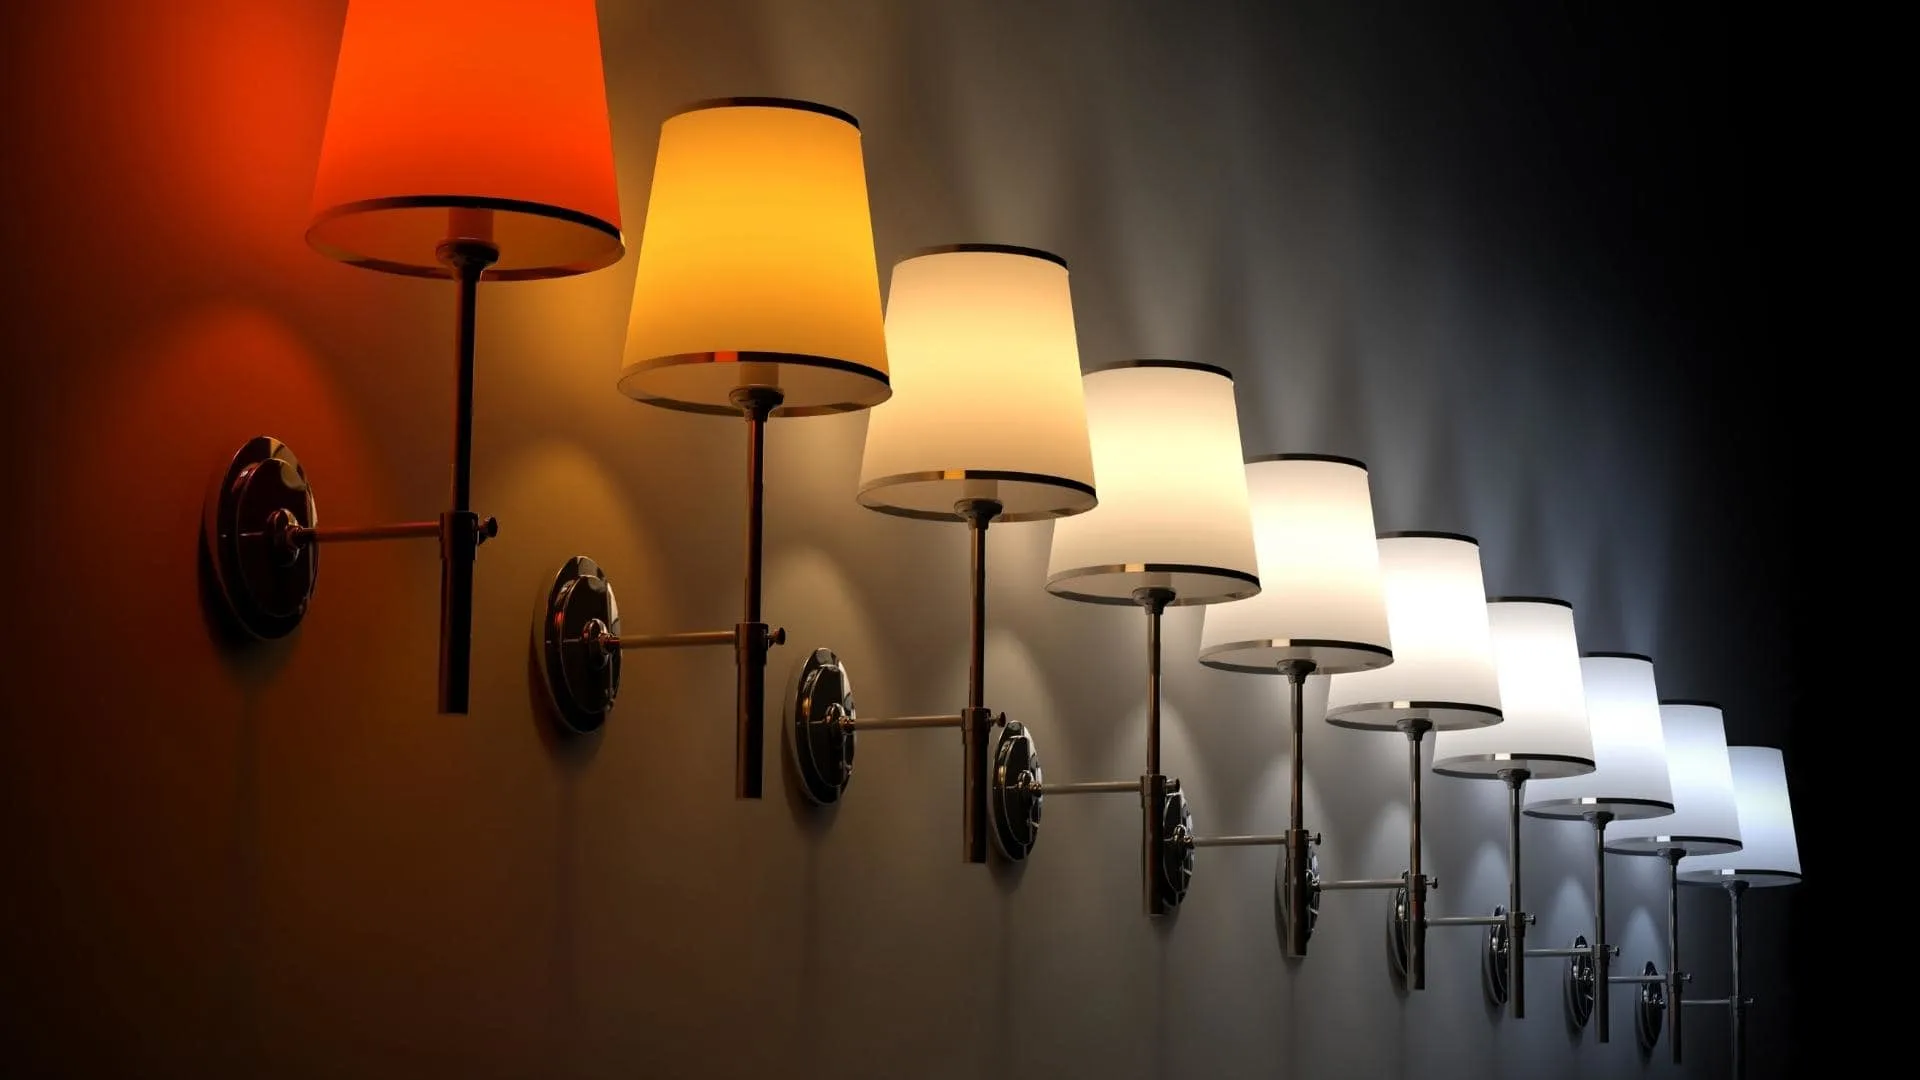 Photo of lamps showing warm and cool color temperature